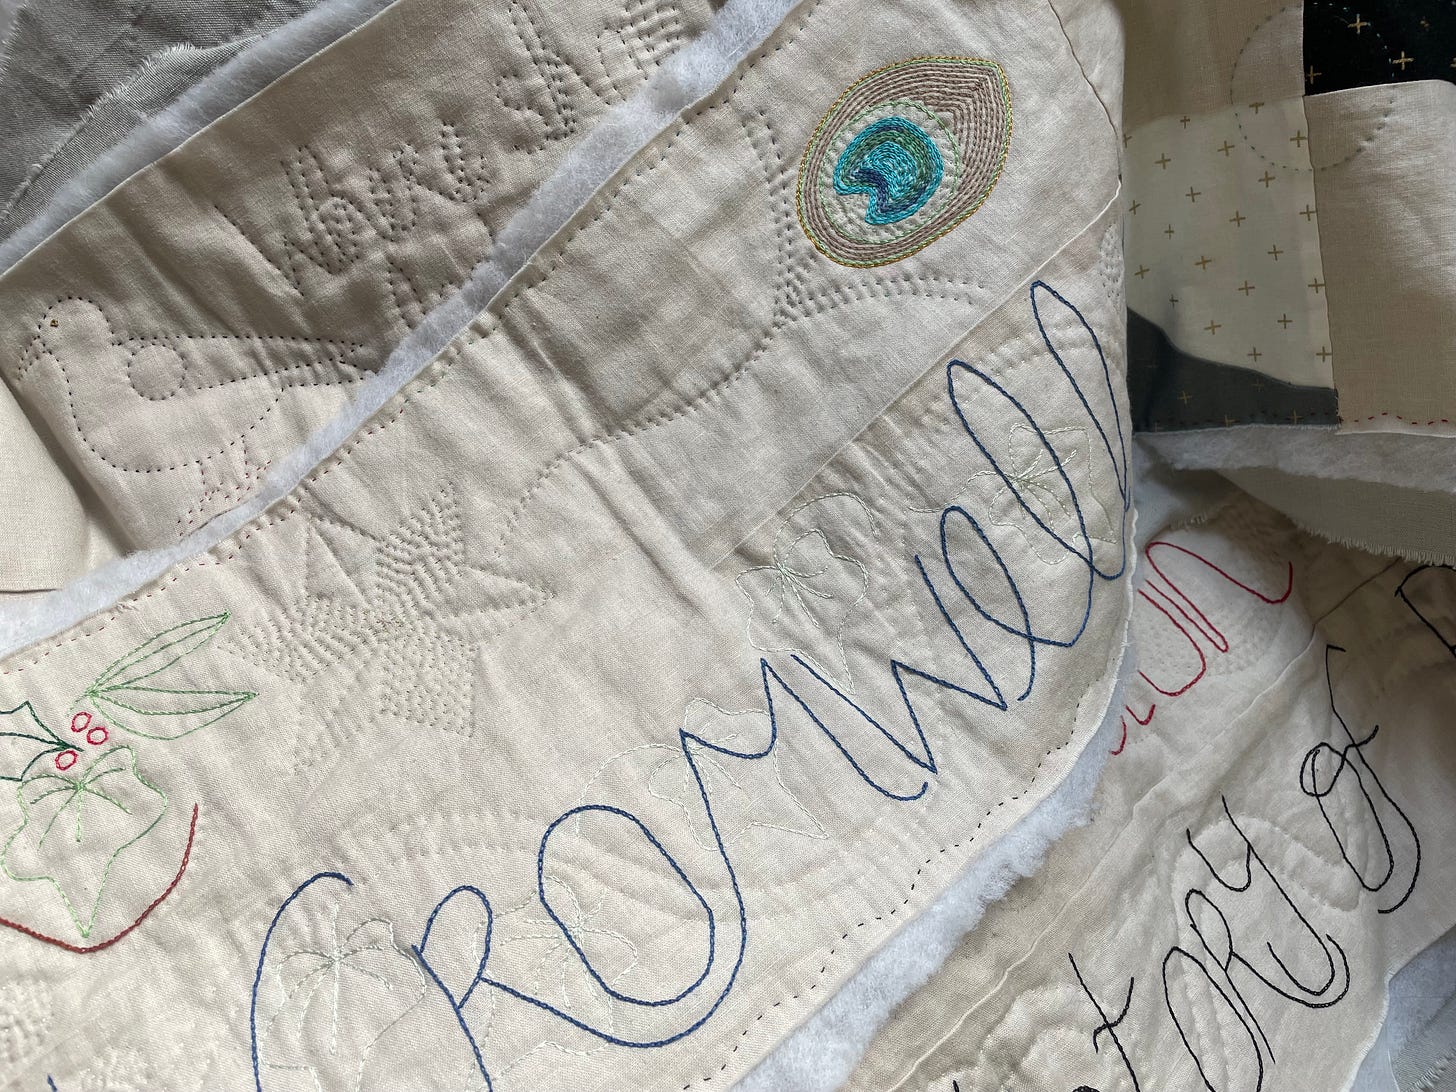 A pile of quilted fabric, including words (Cromwell is visible) and stitched images including birds, a peacock feather, leaves